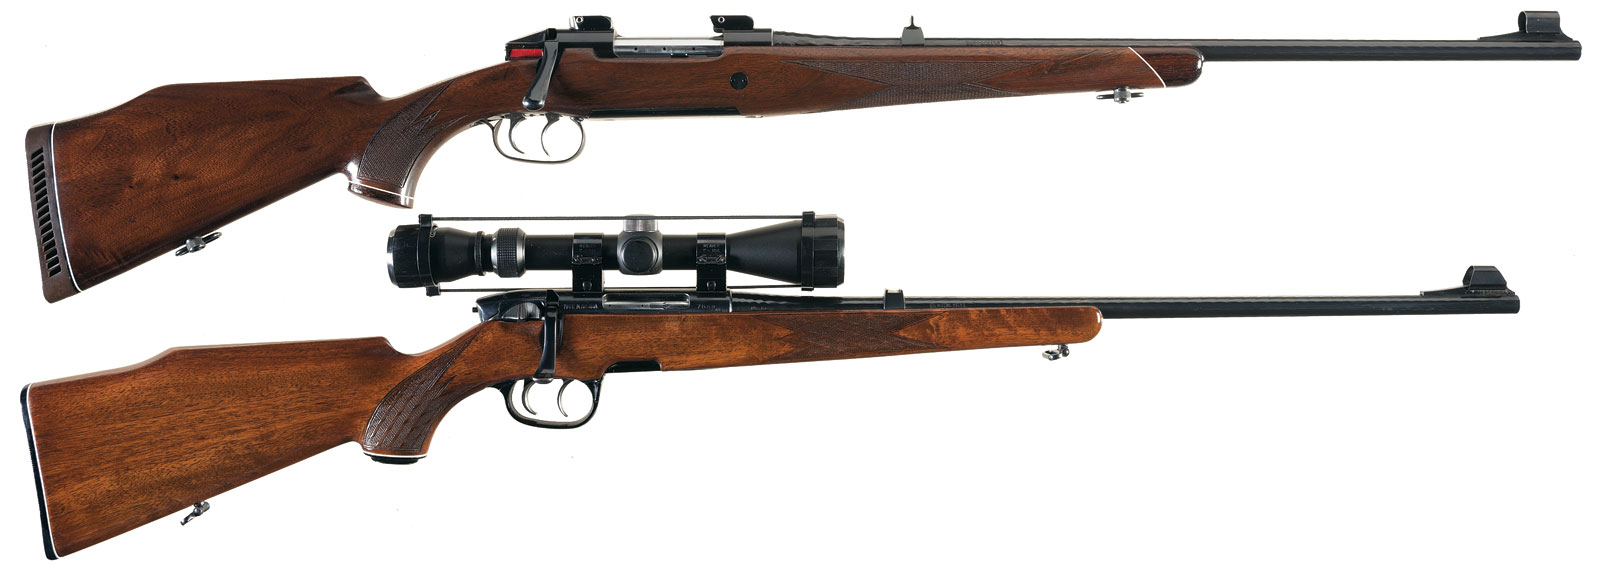 Top rifle is a The Mannlicher Schönauer M72, lower rifle is a Steyr-Mannlicher of the seventies with its plastic fittings. The The Mannlicher Schönauer M72 as you can see is a graceful blending of blued steel and walnut: the Steyr Mannlicher is a blend of blued steel, walnut and plastic that becomes one of the ugliest sporting rifles in existence.